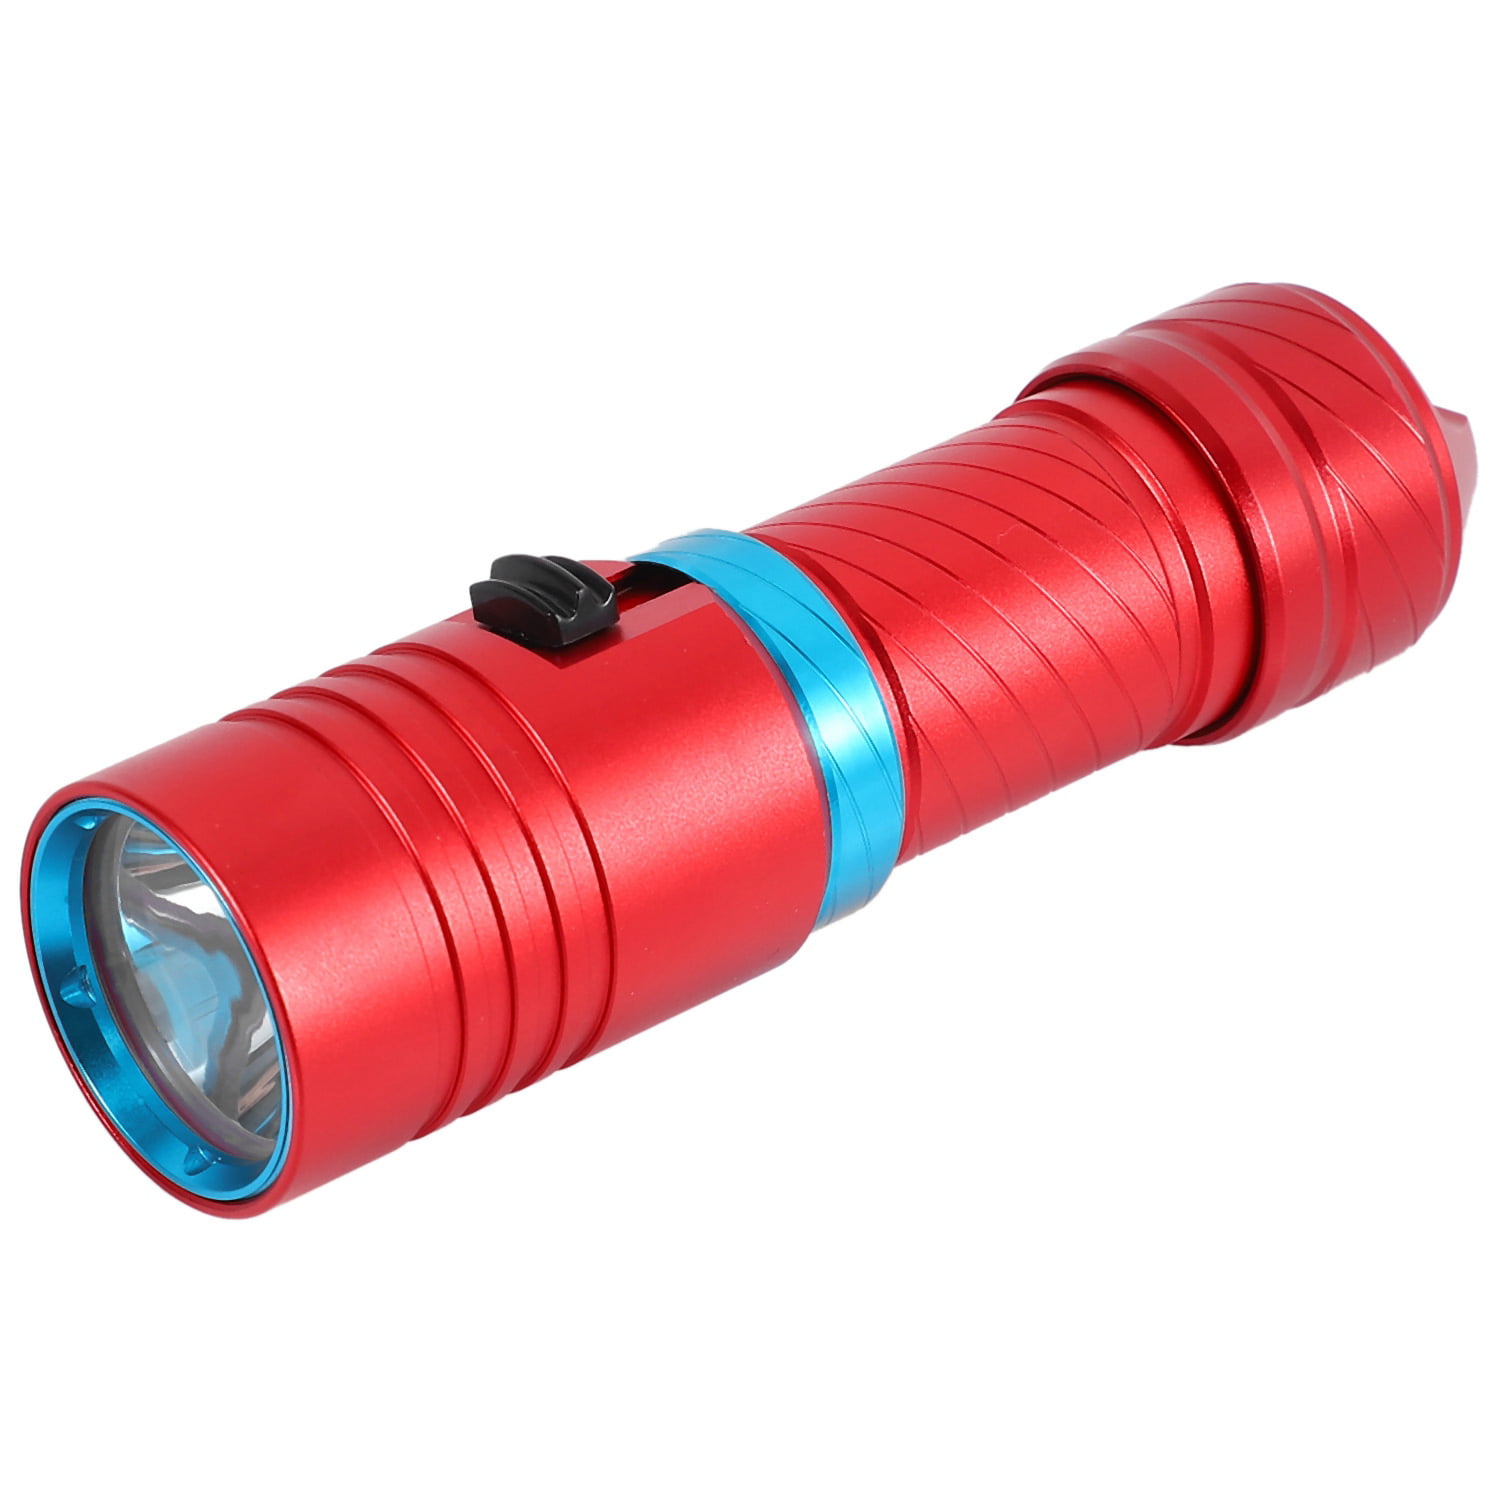 Caving Cycling Running eecoo Camping Lamp,Waterproof Dive Torch 10000 lm 100M L2 LED Diving Flashlight,Stepless Dimming,Underwater Flashlight Torch for Fishing Gold Hiking Camping